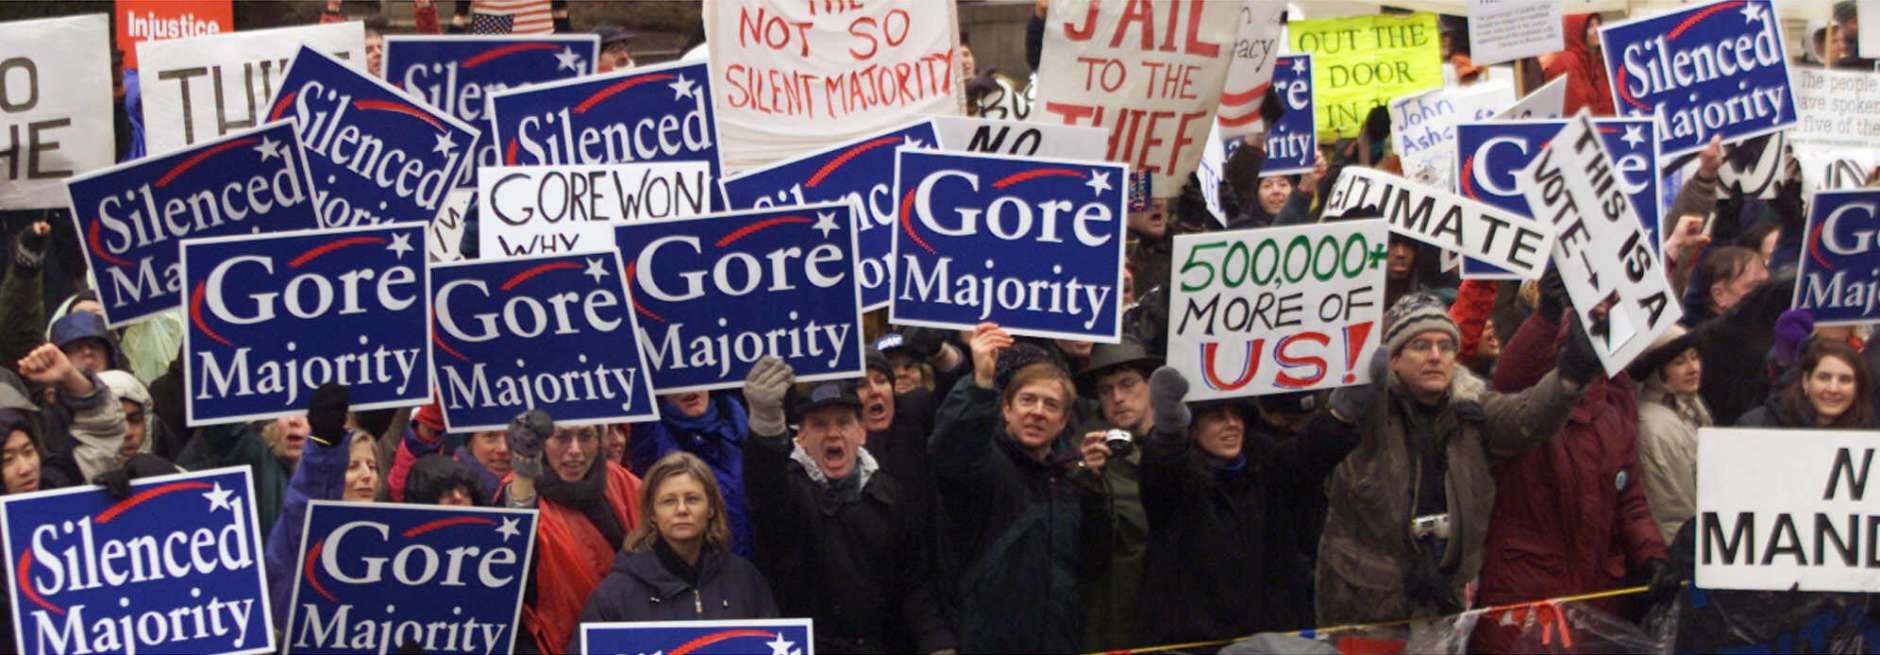 Gore supporters line the parade route along Pennsylvania Avenue in Washington Saturday, Jan. 20, 2001, as the presidential inaugural parade works its way from the Capitol to the White House. (AP Photo/J. Scott Applewhite)